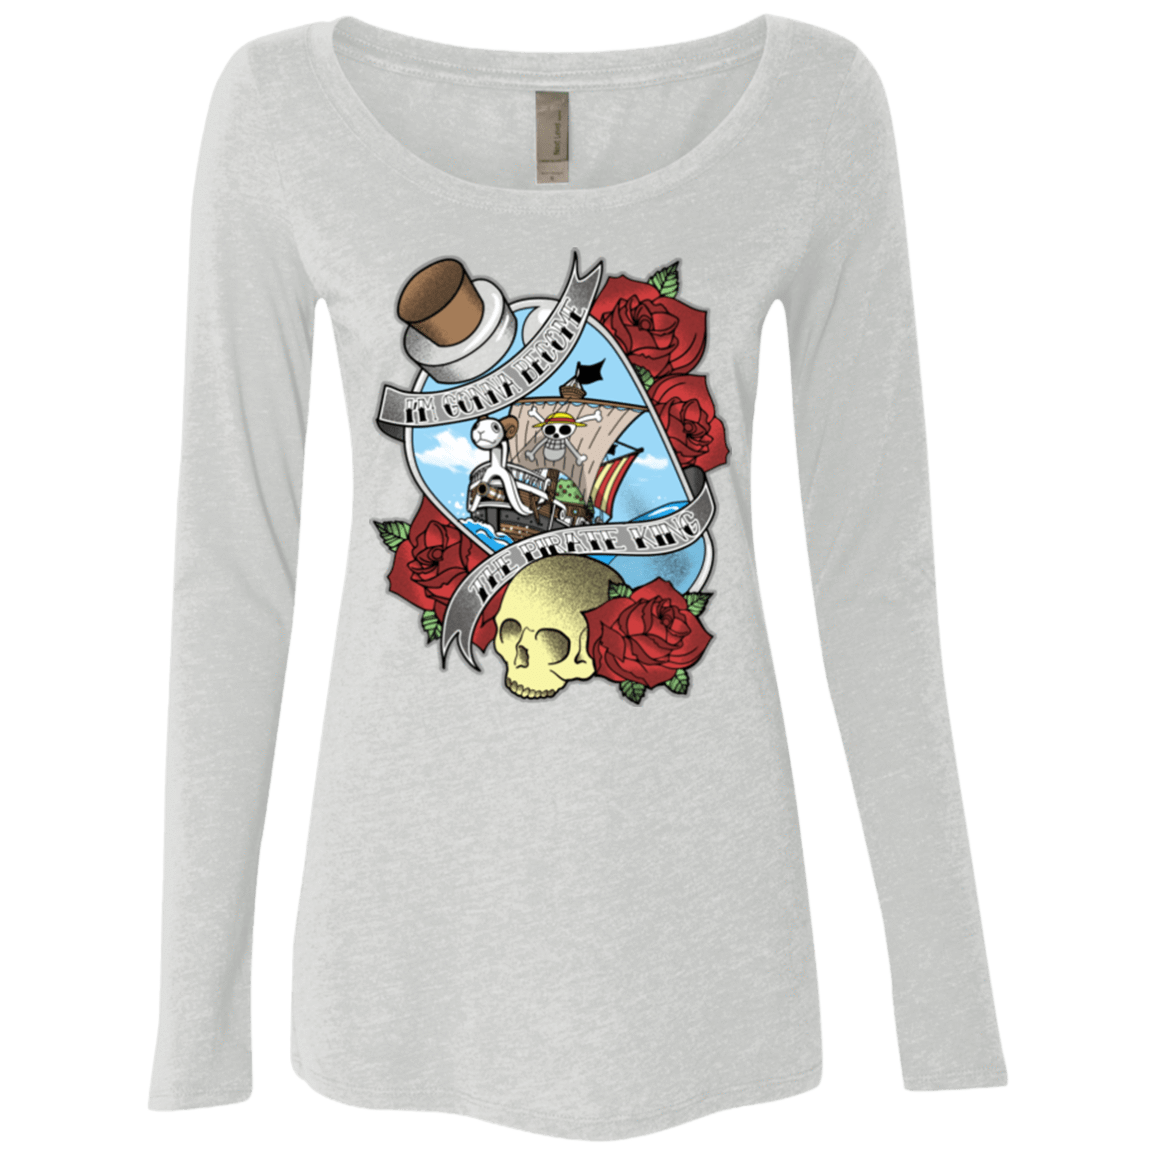 T-Shirts Heather White / Small The Pirate King Women's Triblend Long Sleeve Shirt